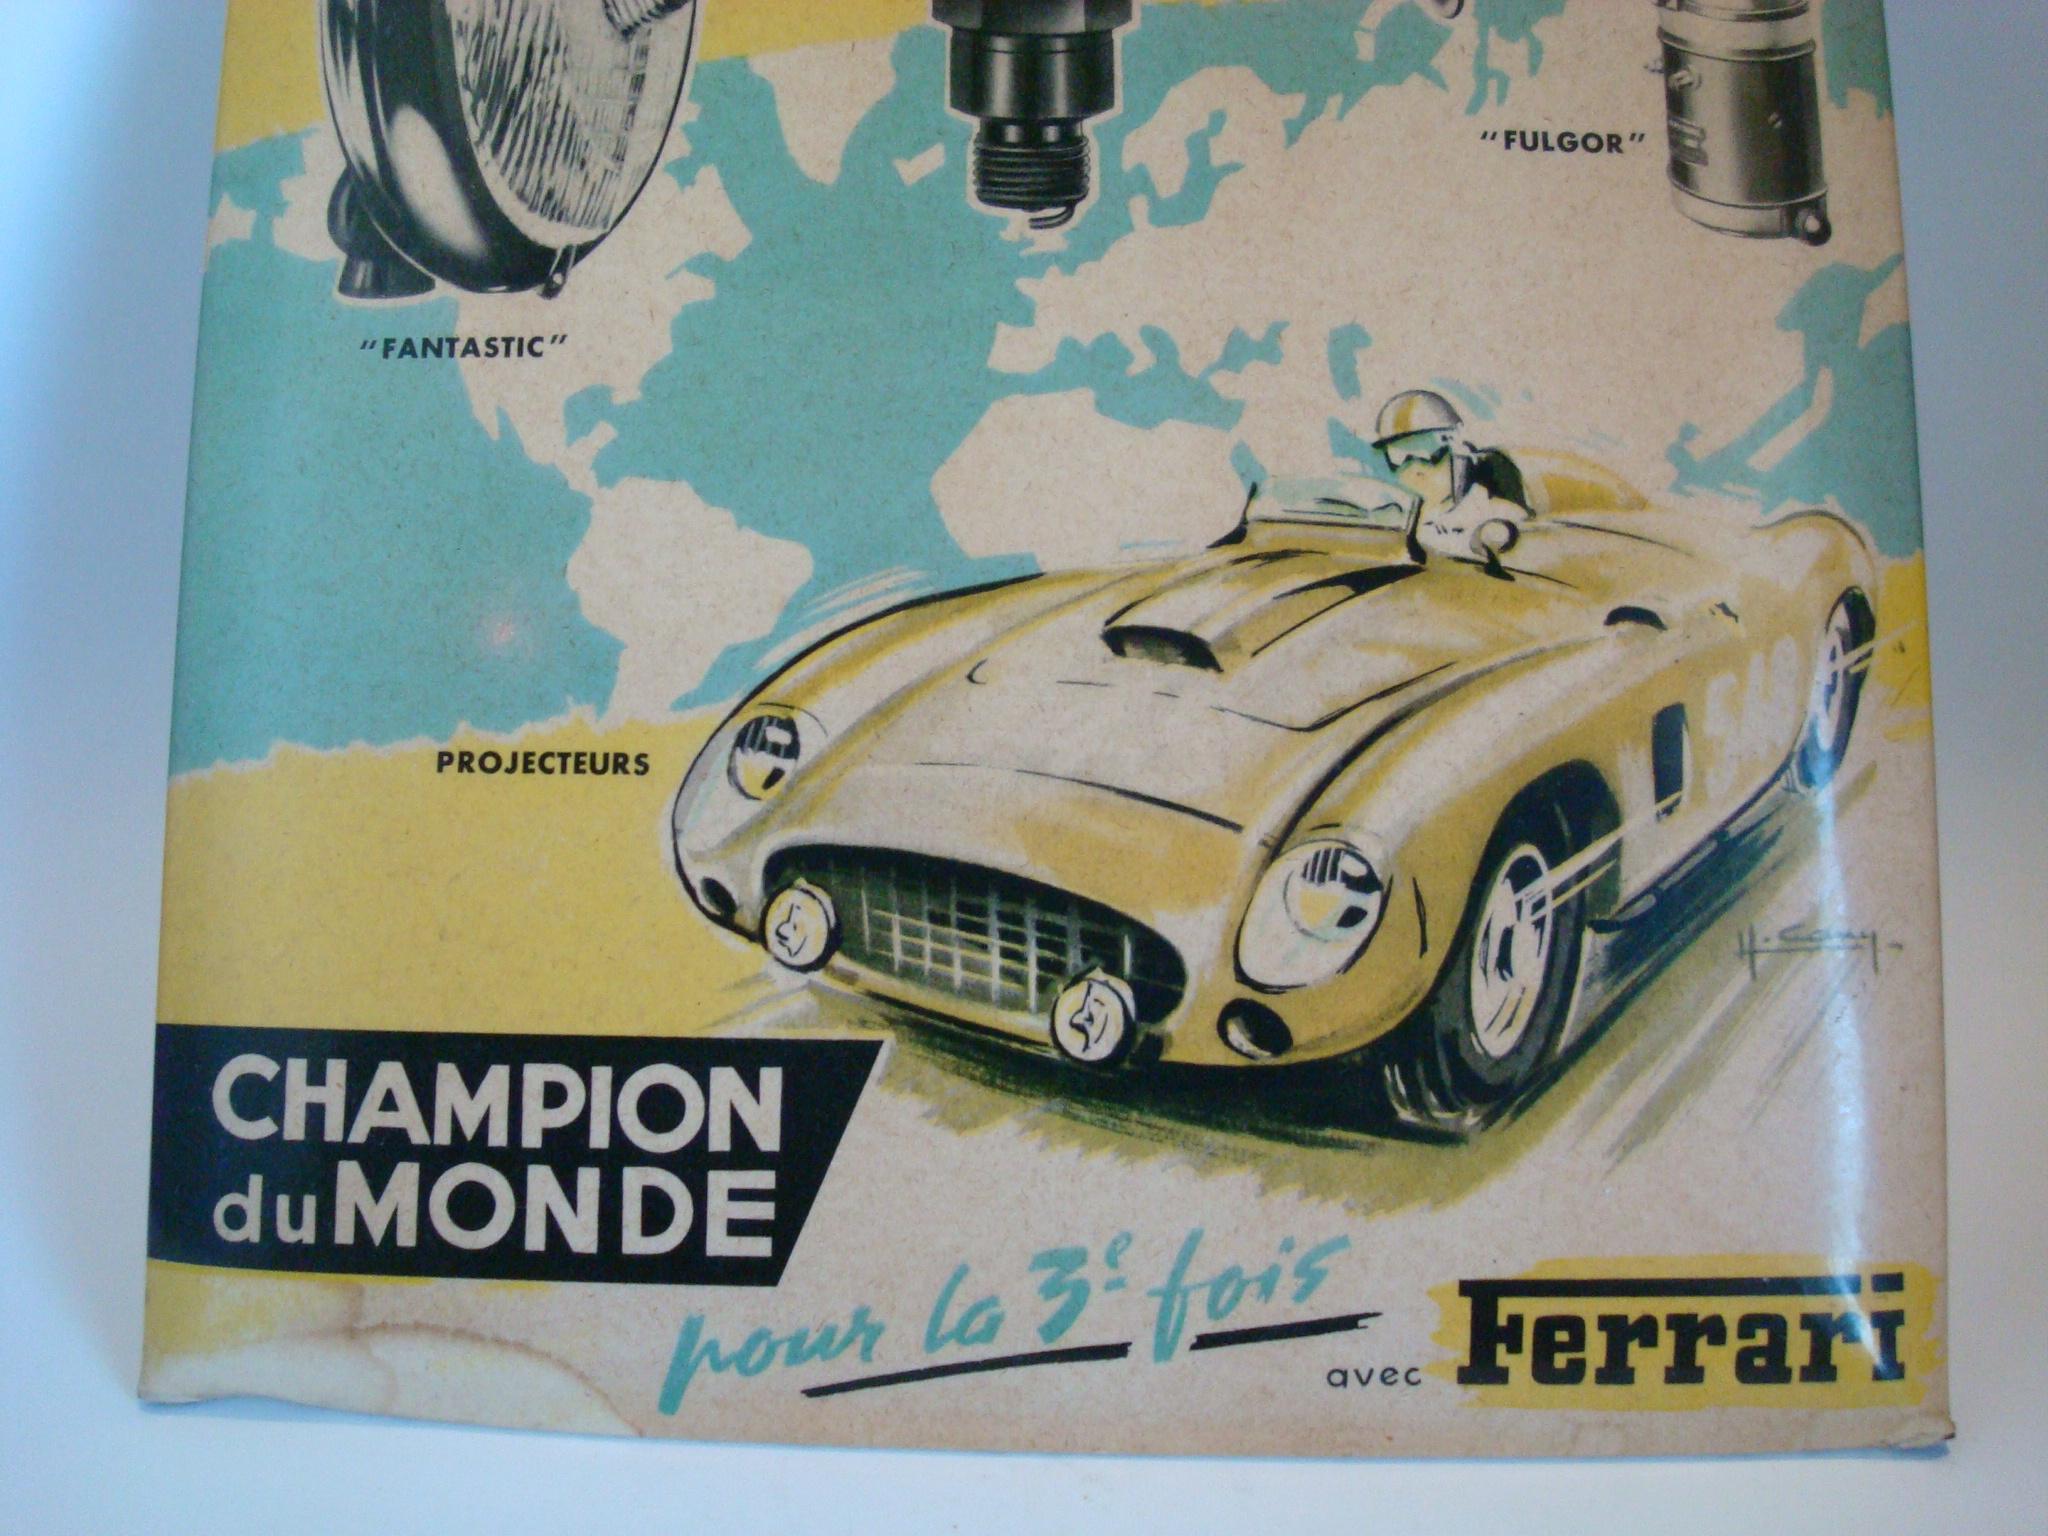 Marchal Ferrari accessory counter advertising sign, ca 1950’s, color litho celluloid over card backing.
The sign was produced when Marchal (electrical car parts including head lamps) provided Ferrari cars of accessory. Very Rare item, perfect for